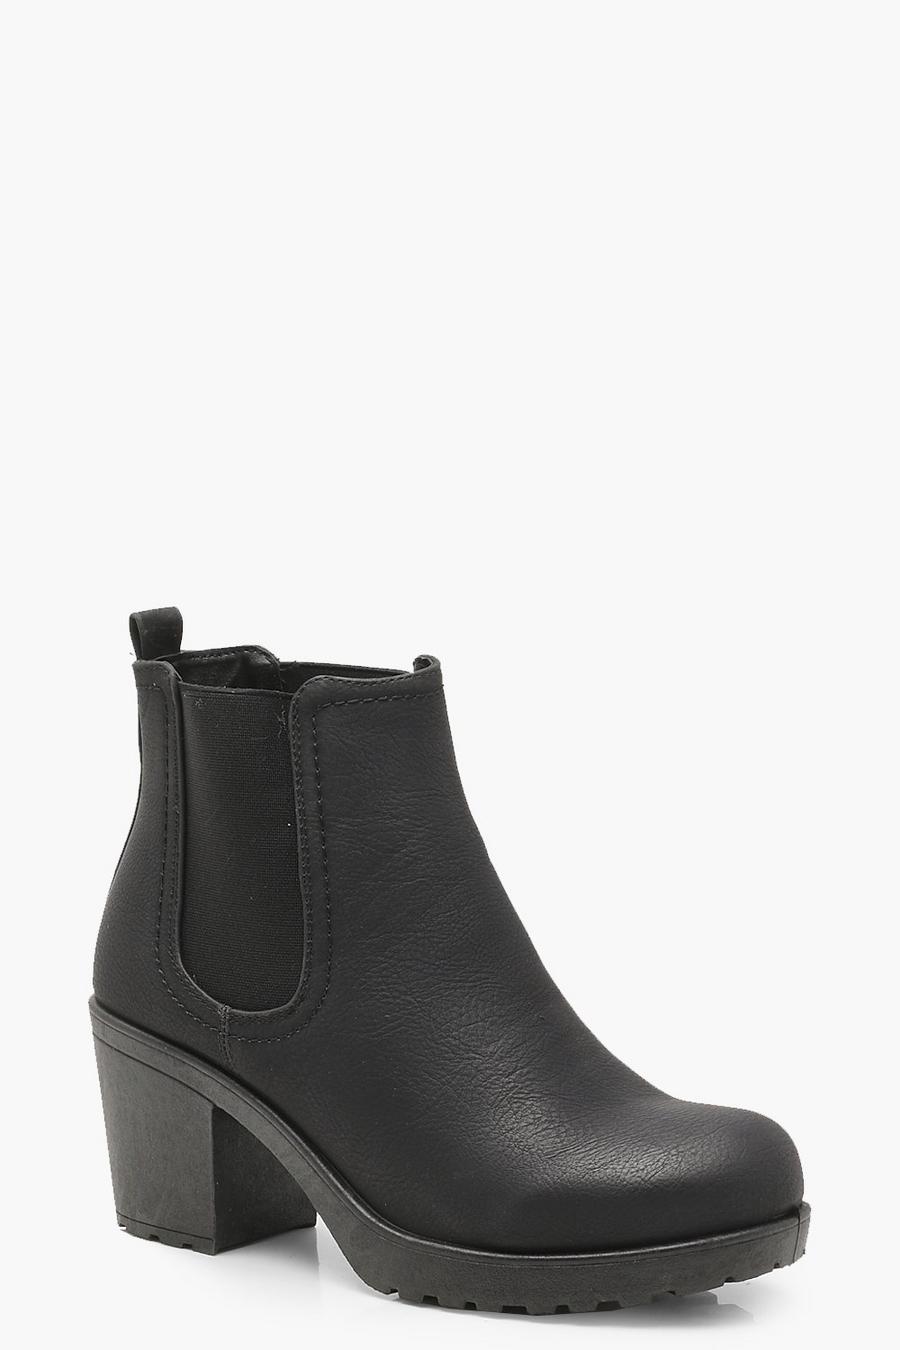 Black Wide Fit Chunky Cleated Heel Chelsea Boots image number 1